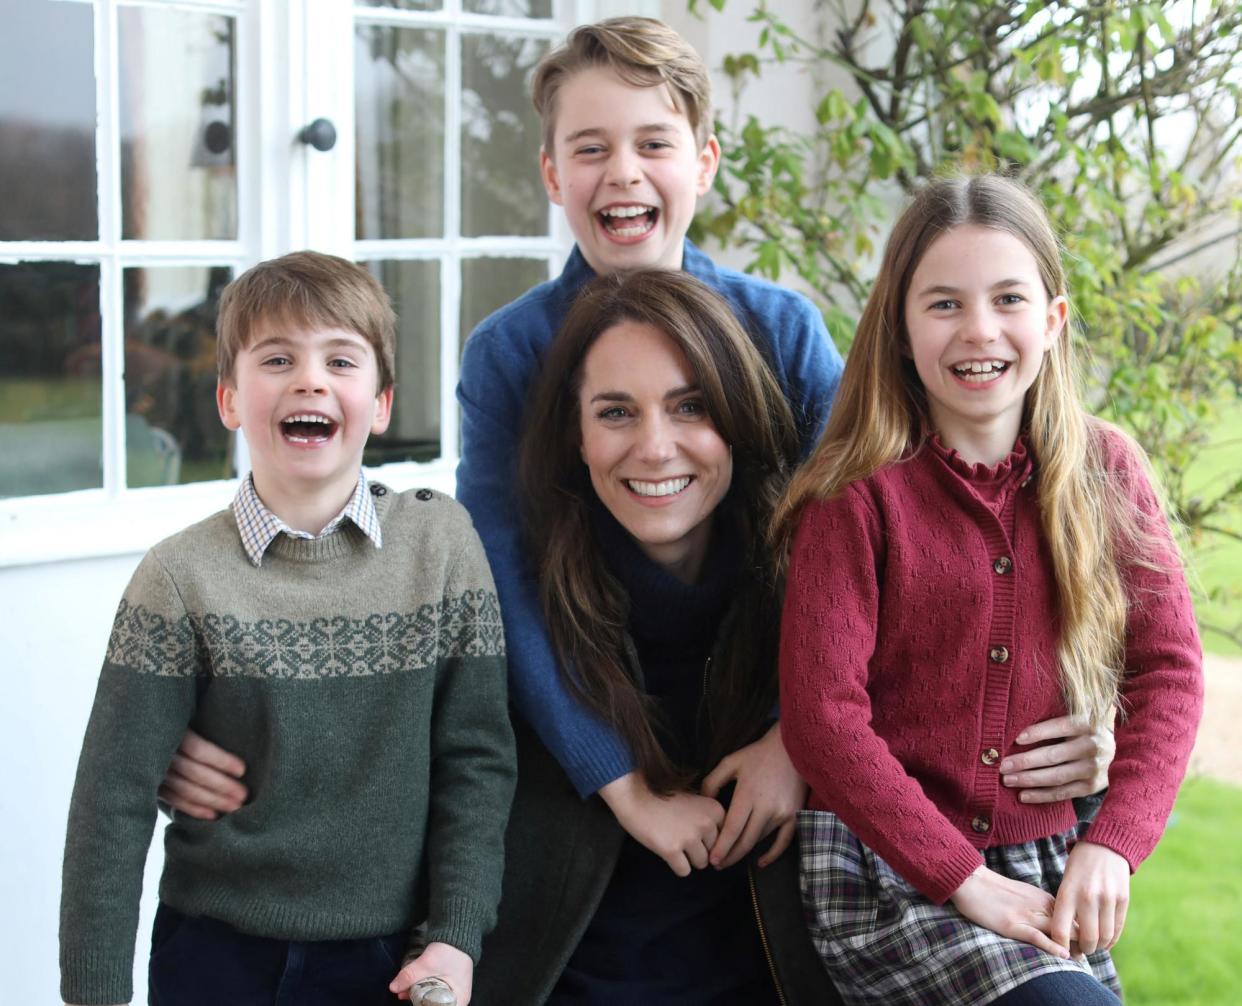 <span>A photo issued by Kensington Palace of the Princess of Wales, with her children, Prince Louis, Prince George and Princess Charlotte, taken in Windsor earlier this week by the Prince of Wales.</span><span>Photograph: Prince of Wales/Kensington Palace/Reuters</span>